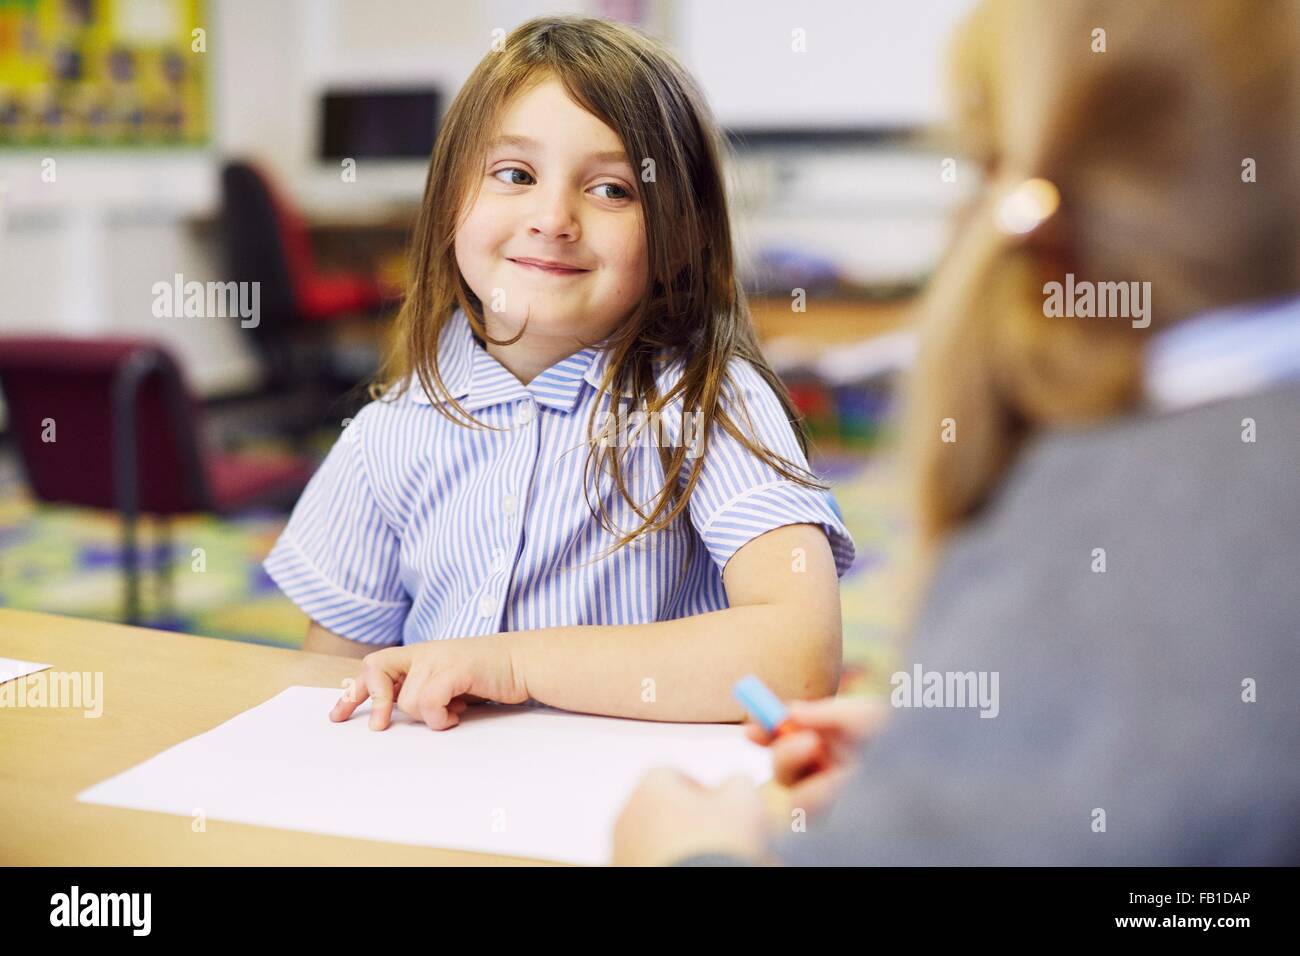 Two girls drawing at desk in elementary school classroom Stock Photo